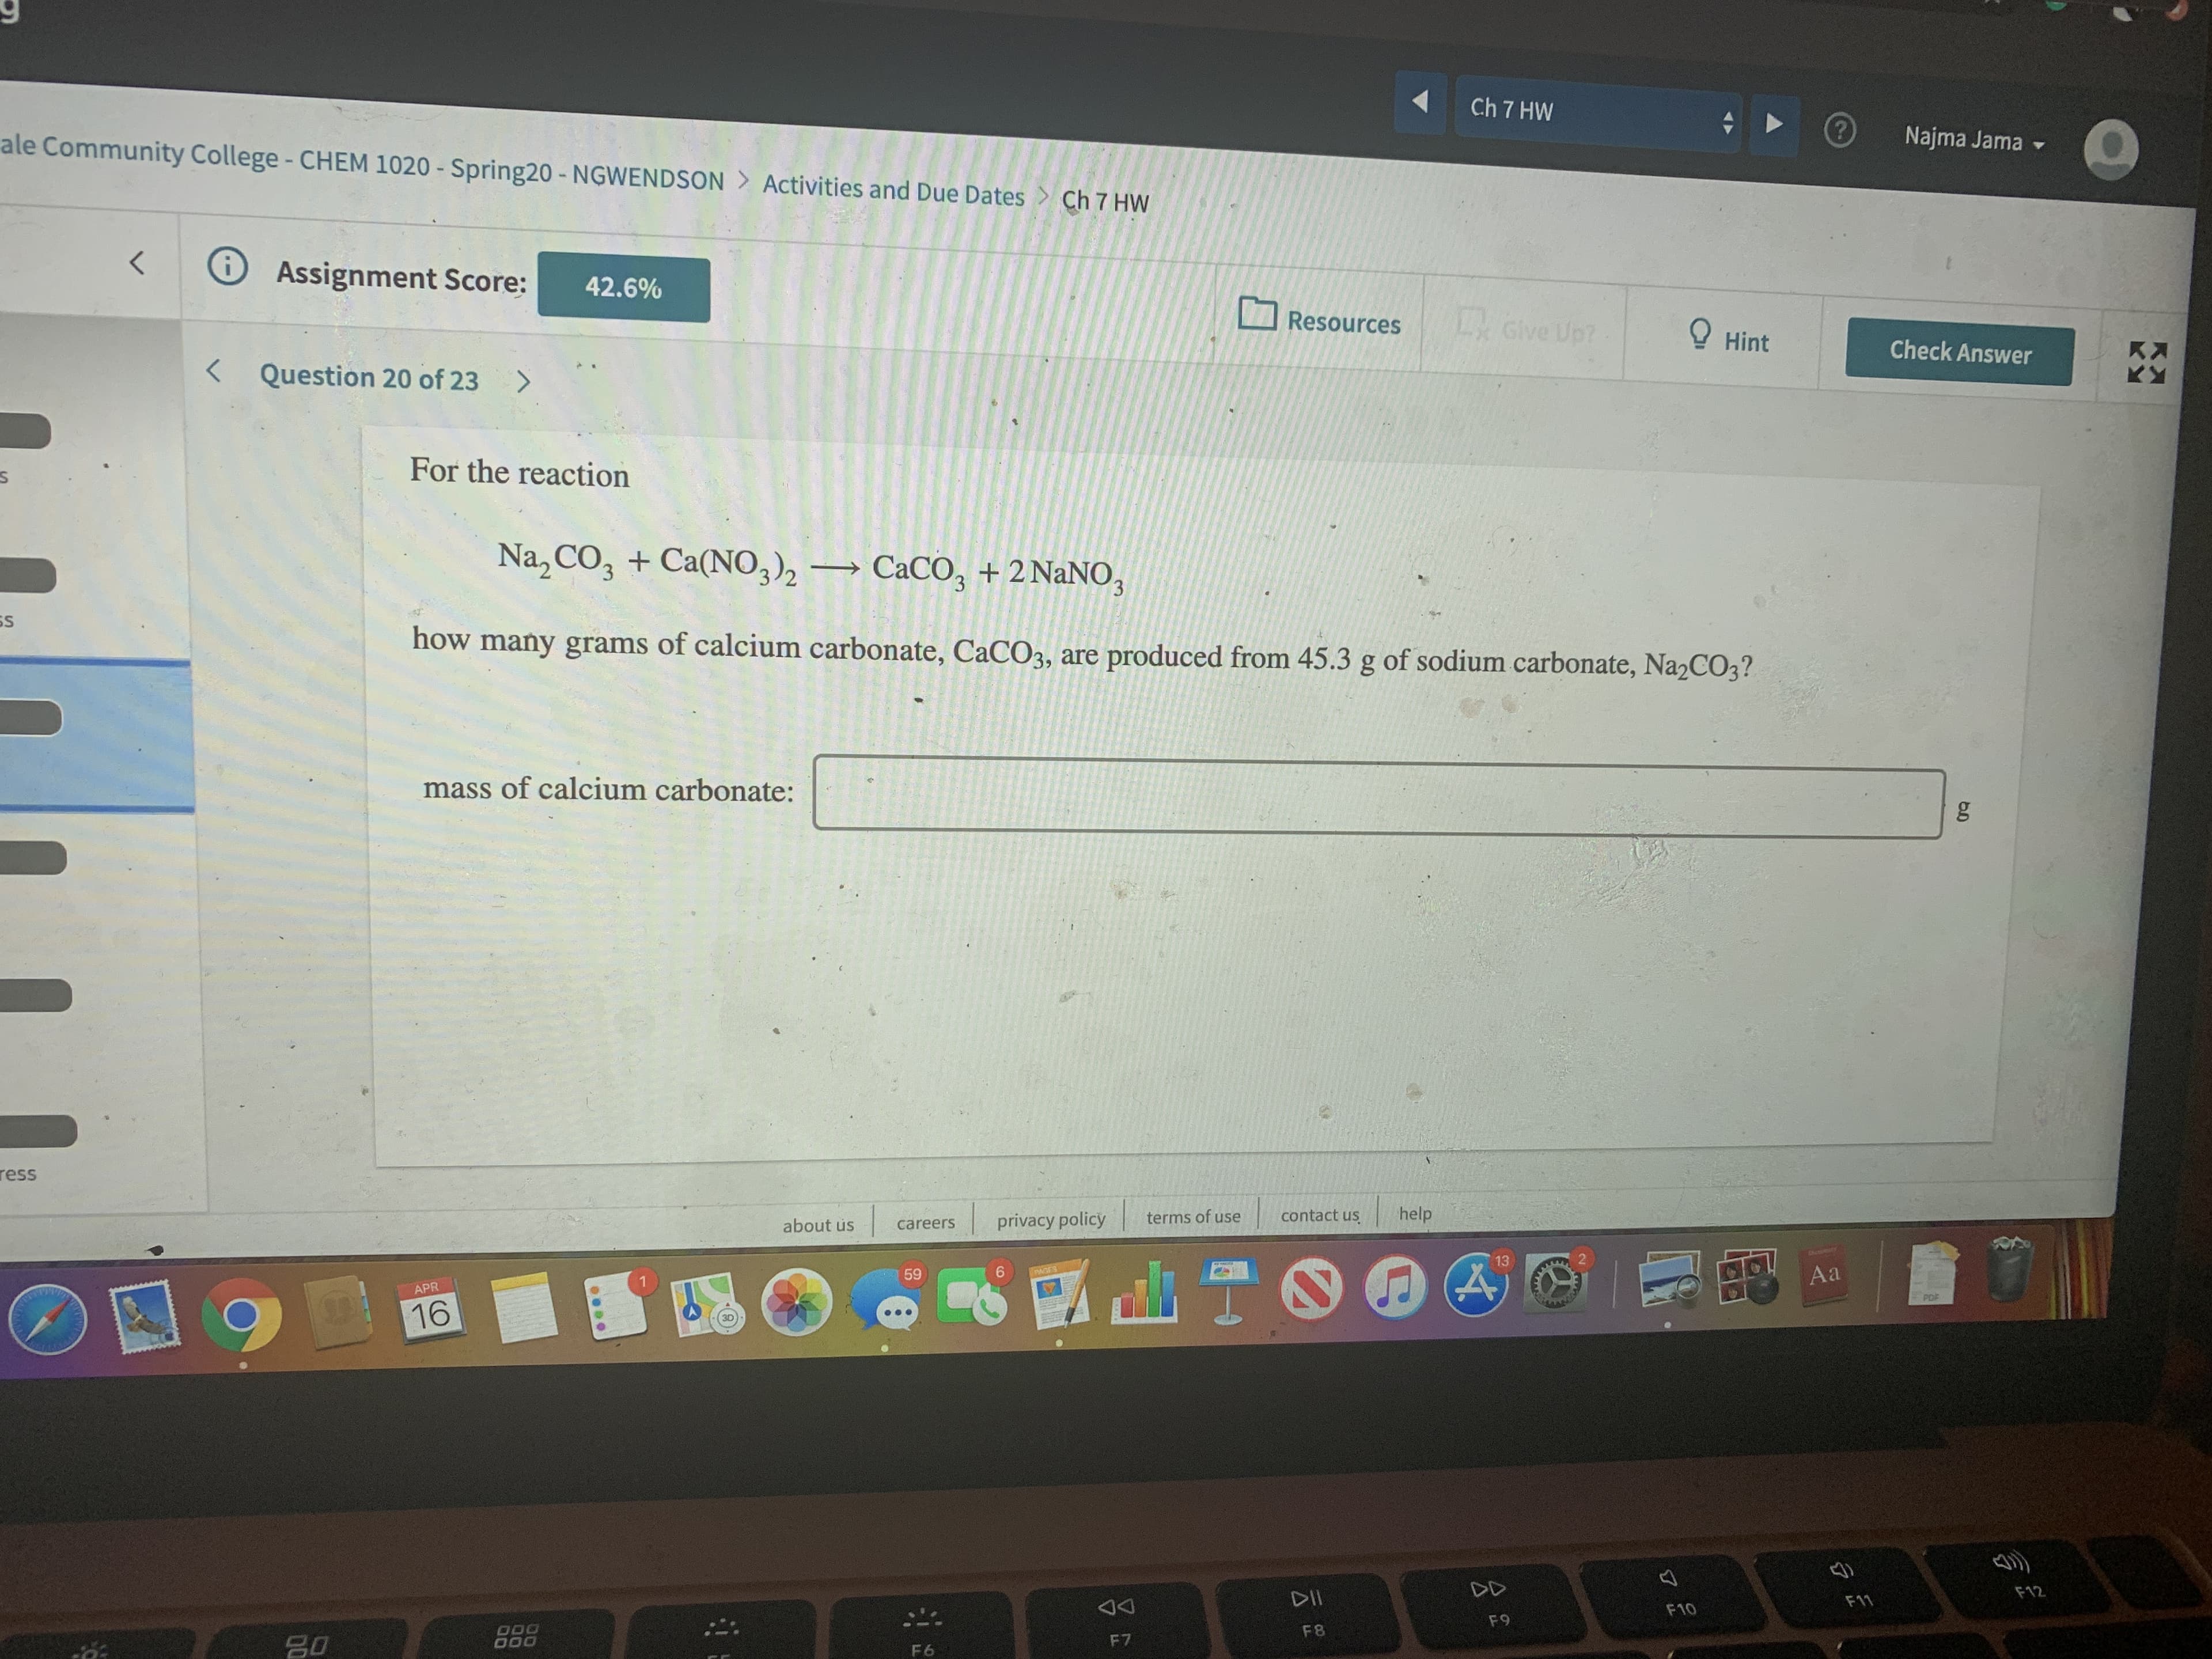 Ch 7 HW
ale Community College- CHEM 1020 - Spring20 - NGWENDSON > Activities and Due Dates > Ch 7 HW
(?
Najma Jama -
Assignment Score:
42.6%
Resources
L Give Up?
O Hint
Check Answer
Kス
く
< Question 20 of 23 >
For the reaction
Na, CO, + Ca(NO,)2
CACO, + 2 NaNO,
3.
SS
how many grams of calcium carbonate, CaCO3, are produced from 45.3 g of sodium carbonate, Na2CO3?
mass of calcium carbonate:
ress
about us
privacy policy
terms of use
contact us
help
careers
13
9.
Aa
59
PAGES
APR
PDF
16
DD
F12
DII
F11
F10
F9
000
F8
F7
80
F6
